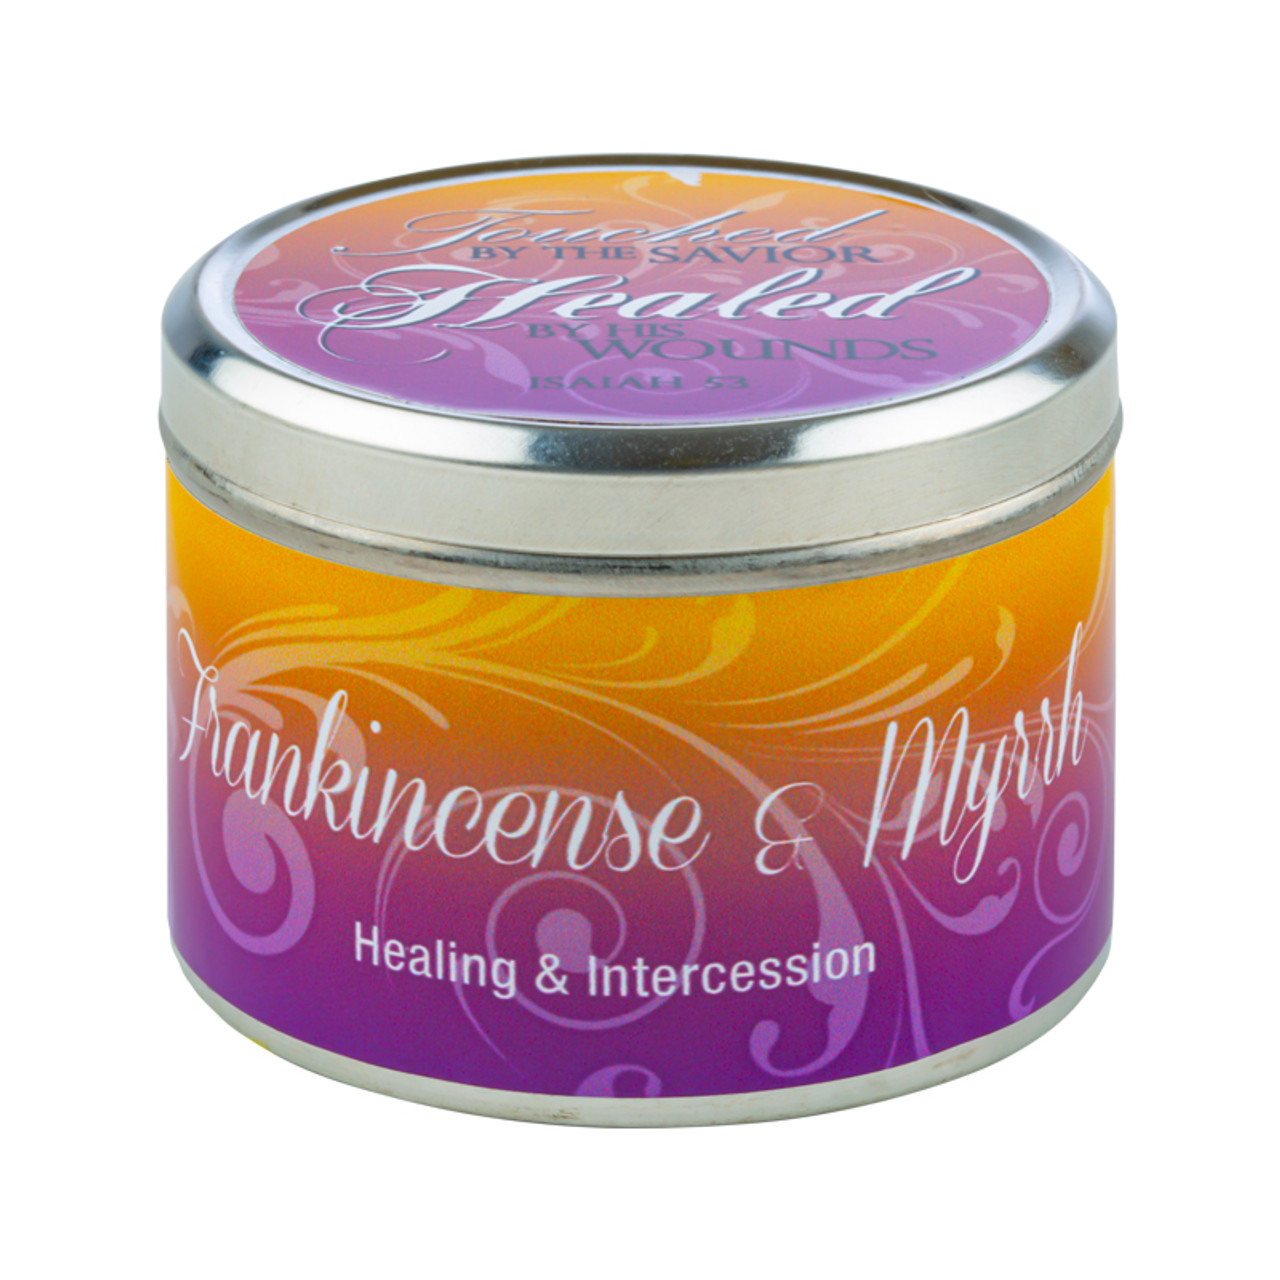 Frankincense and myrrh scented candle, Incense scented candle, Candles made  in Raleigh, NC — Oak City Scents Candles